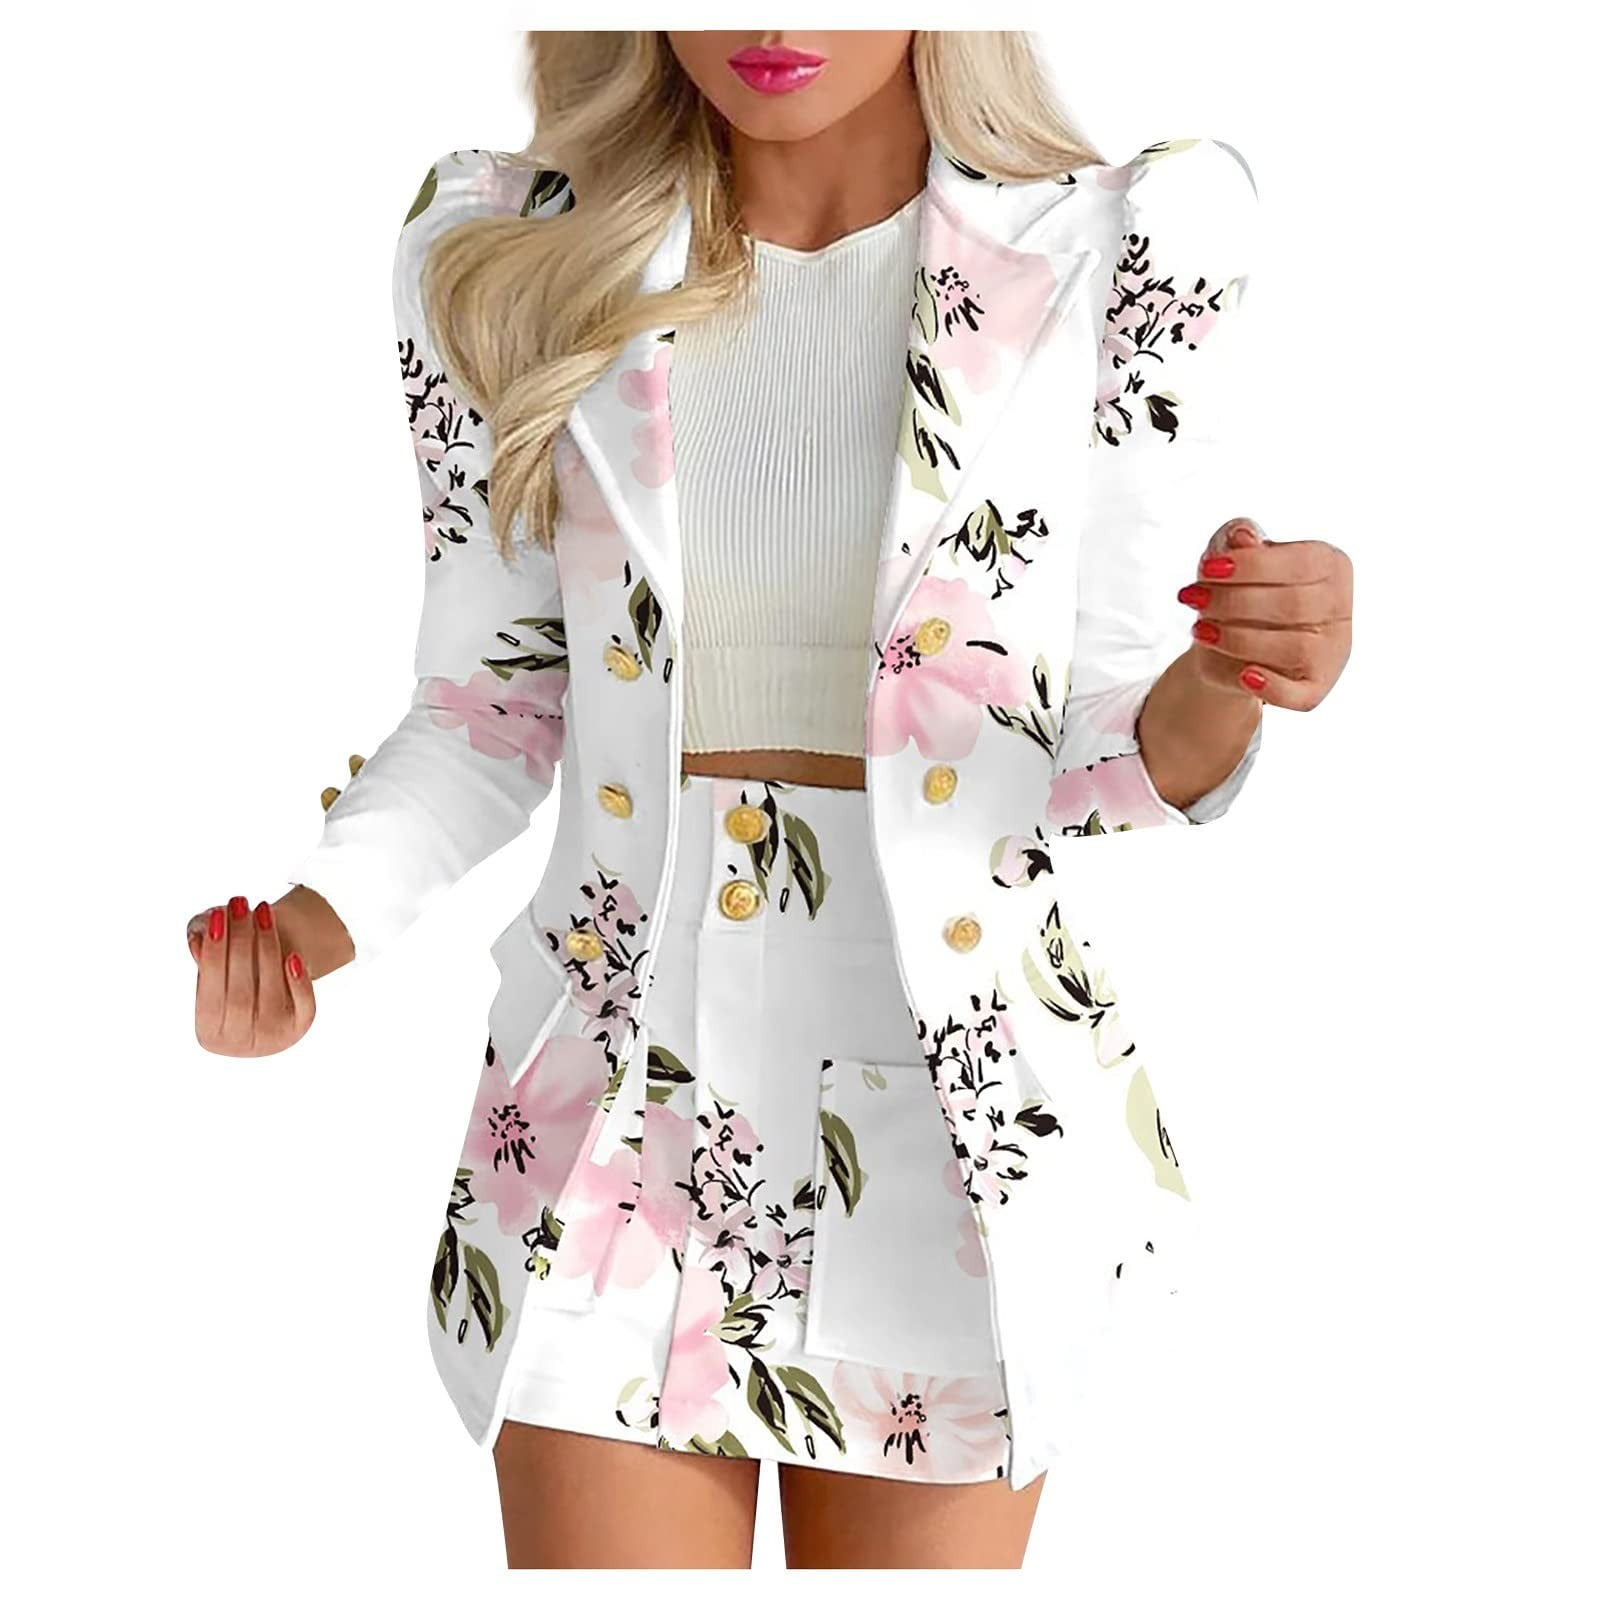 Niuer Women Floral Print Suit Sets Slim Fit Business 2 Piece Double  Breasted Blazer and Skirt With Pockets Casual Outfits White M 